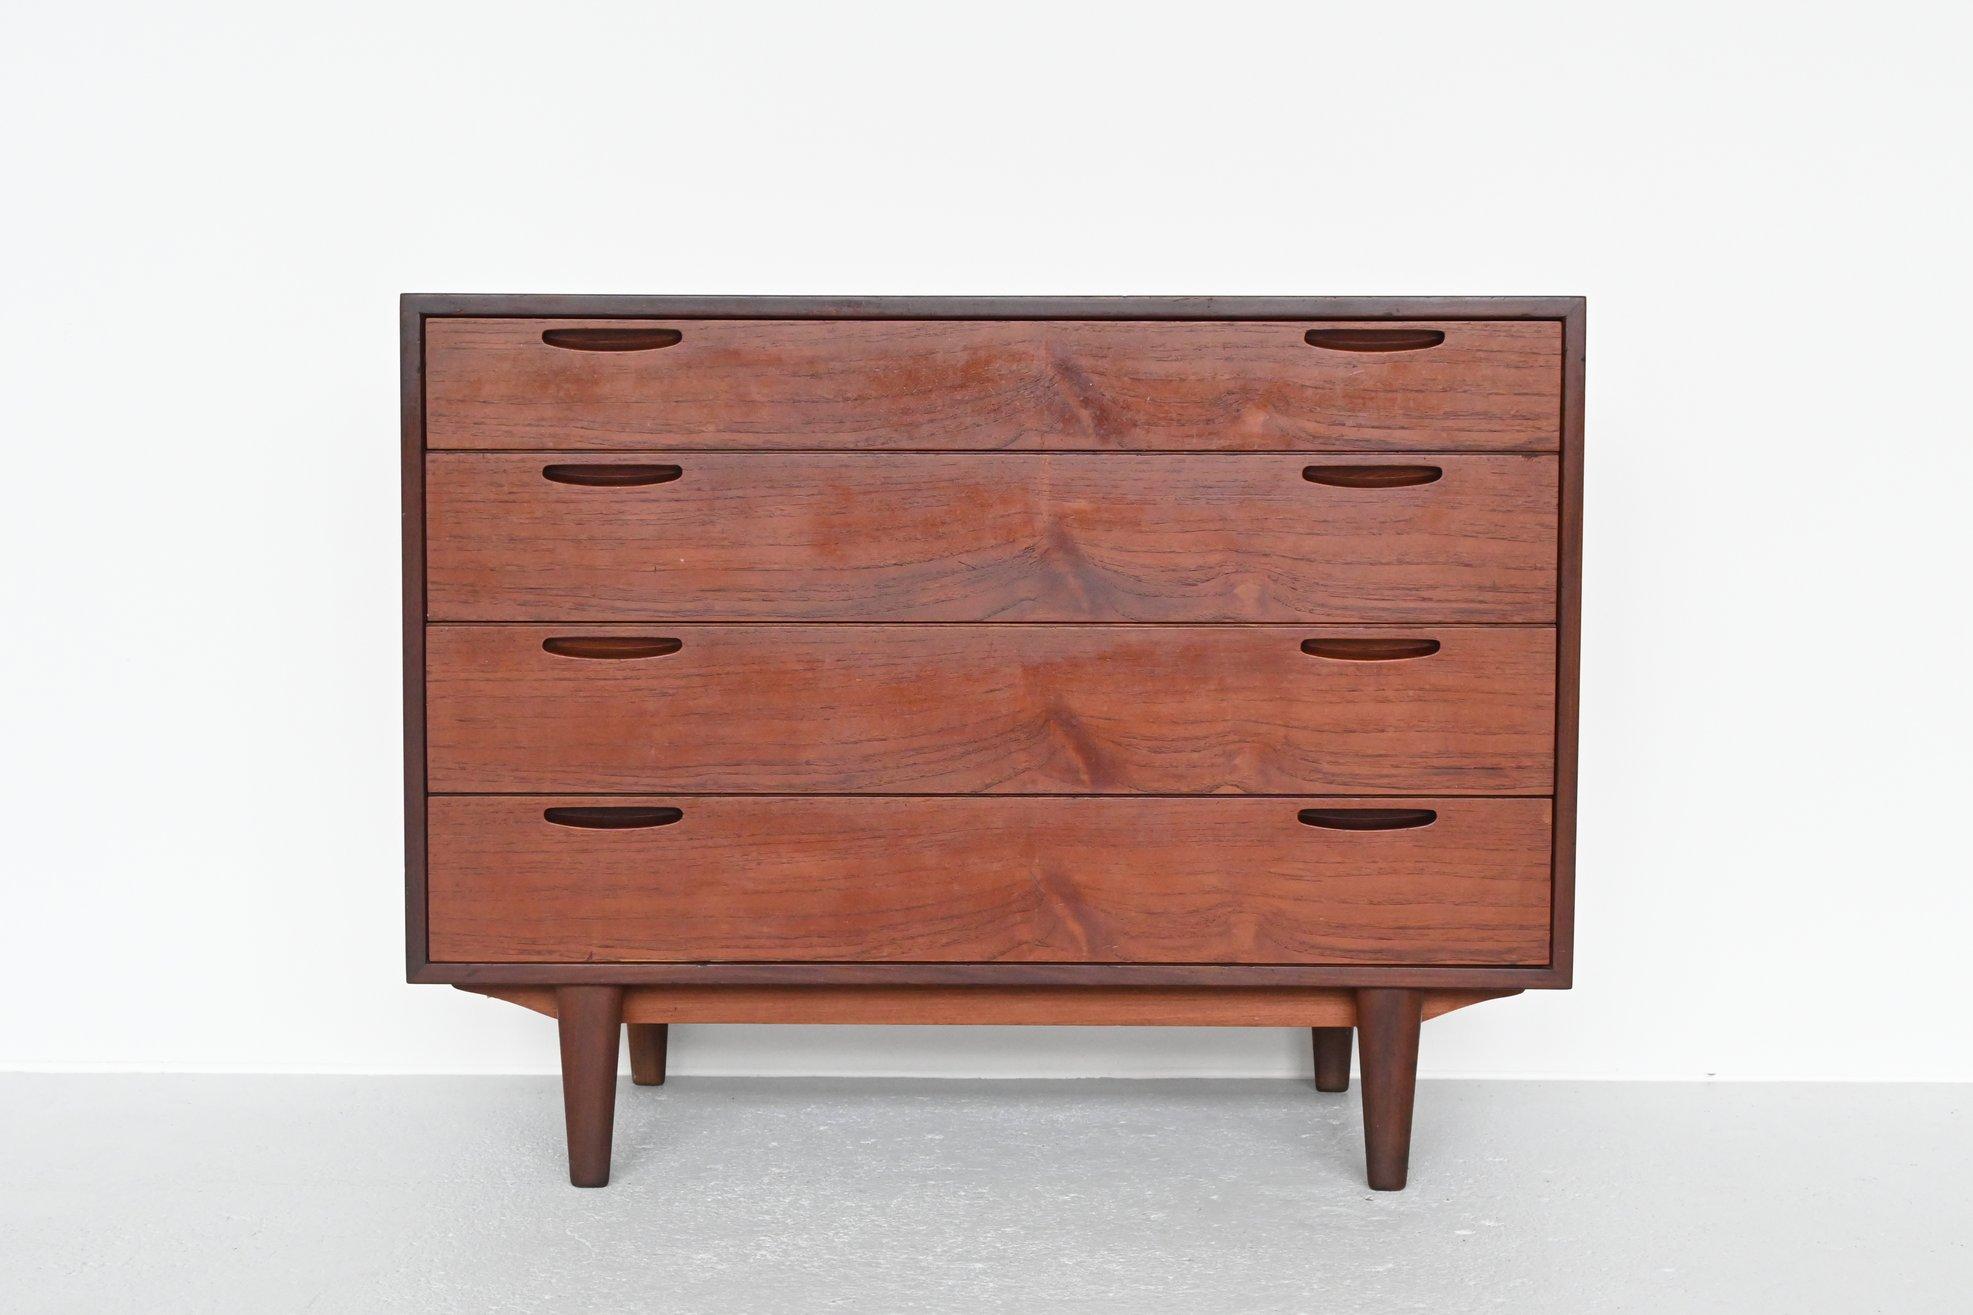 Very nice chest of drawers designed by Ib Kofod-Larsen and manufactured by J. Clausen Brande Møbelfabrik, Denmark, 1960. Typical high quality Scandinavian design, superb finished all around and even the teak wooden back. Nice details are the